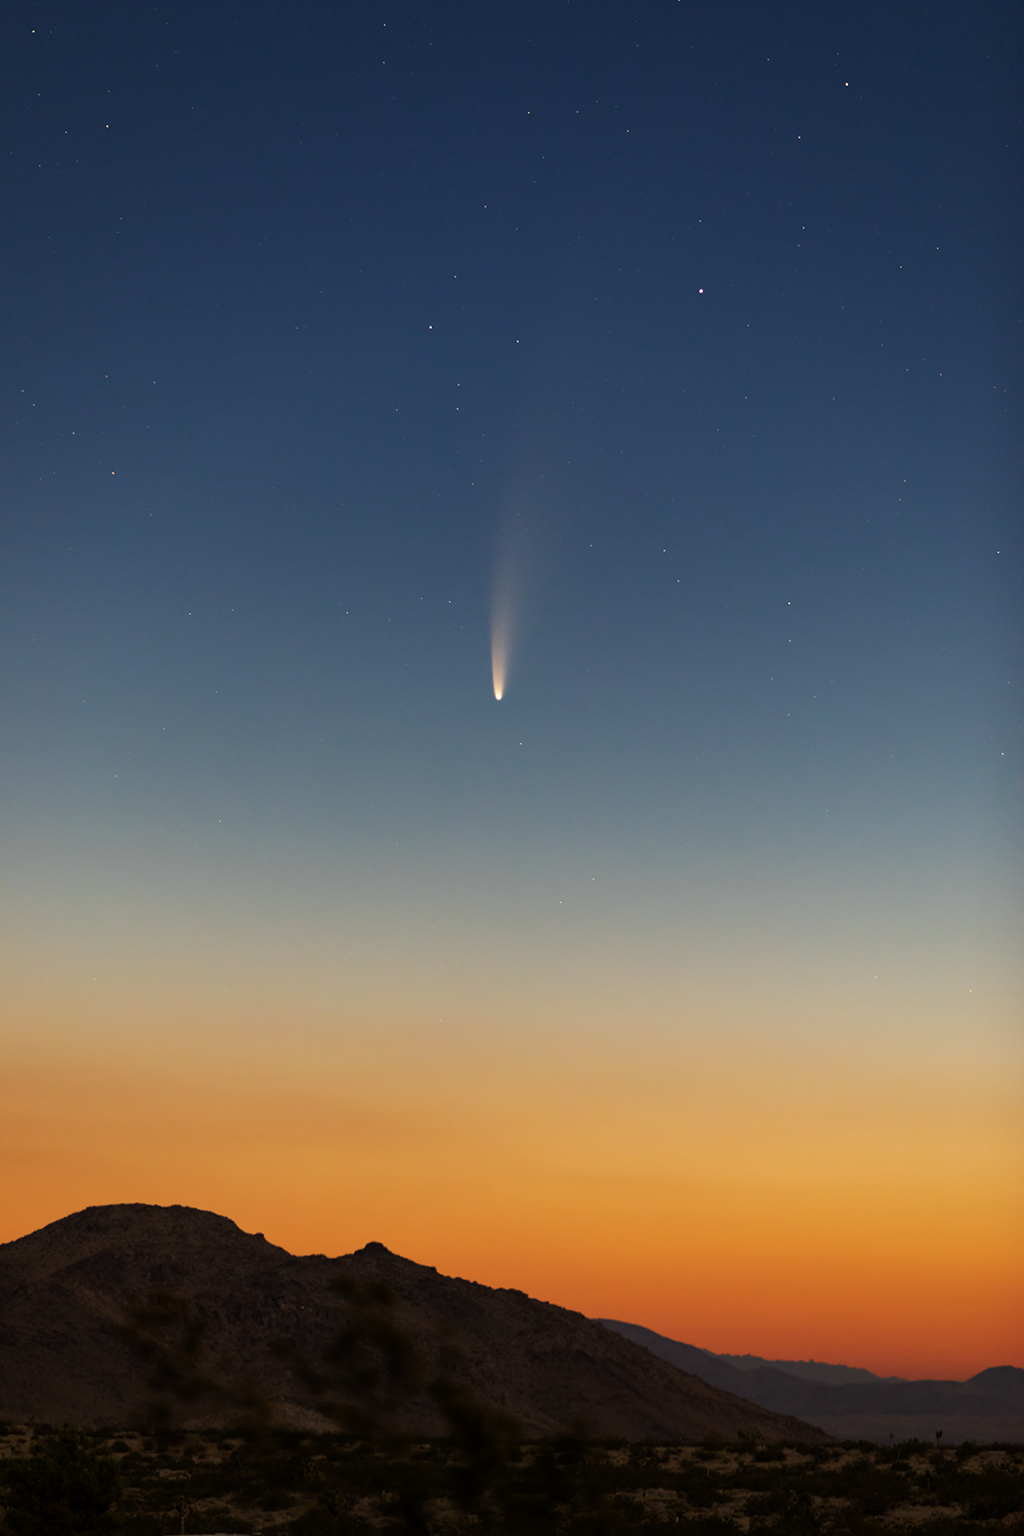 Portrait view of Comet C/2020 F3 (NEOWISE) in the pre-dawn sky over the Mojave Desert (Landers, California). Click the image for a larger version.